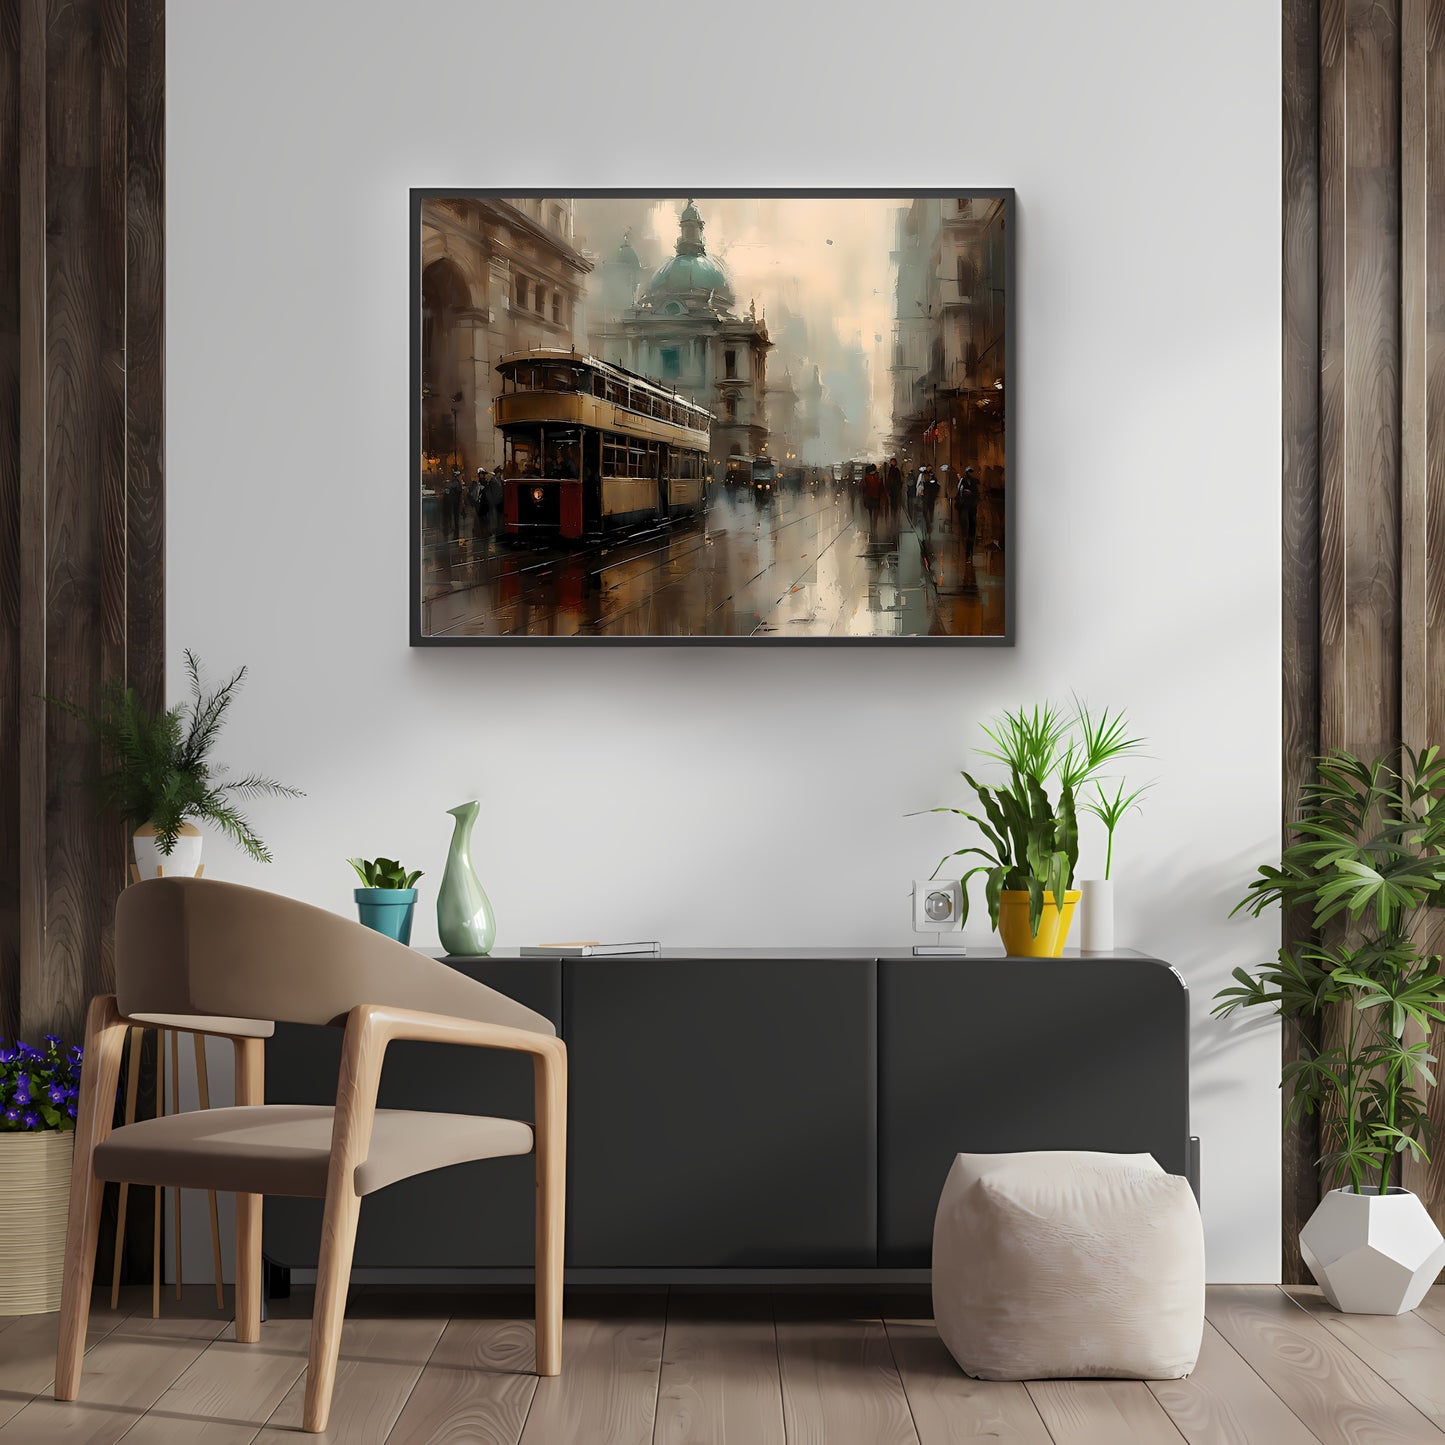 Historic London Street 19th Century Vintage Paper Poster Prints Wall Art Cityscape Impressionistic Painting Nostalgia Artwork Above Couch Decor